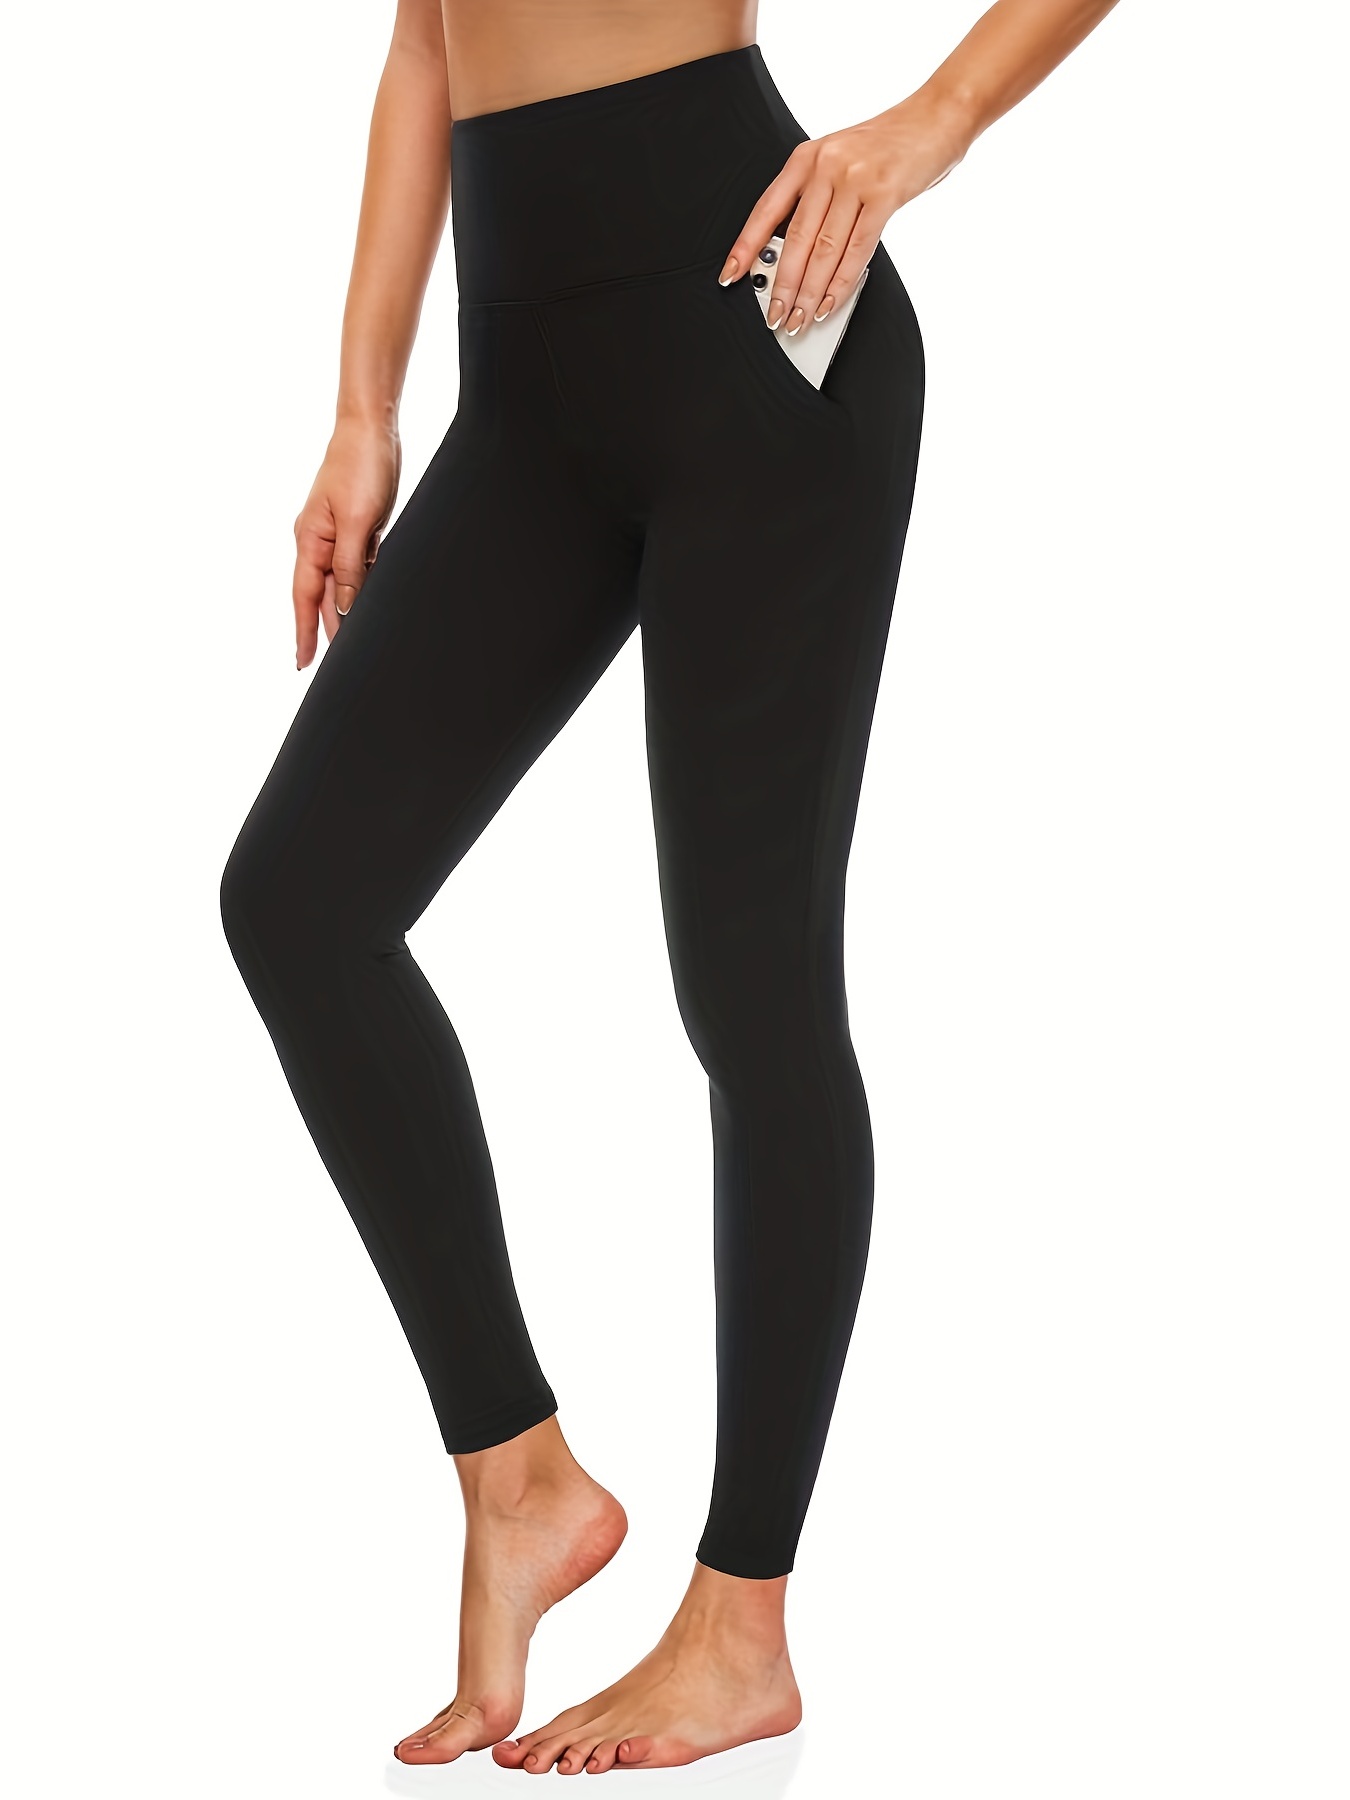 Leggings with Pockets for Women,High Waist Tummy Control Workout Yoga Pants-  Black - Black